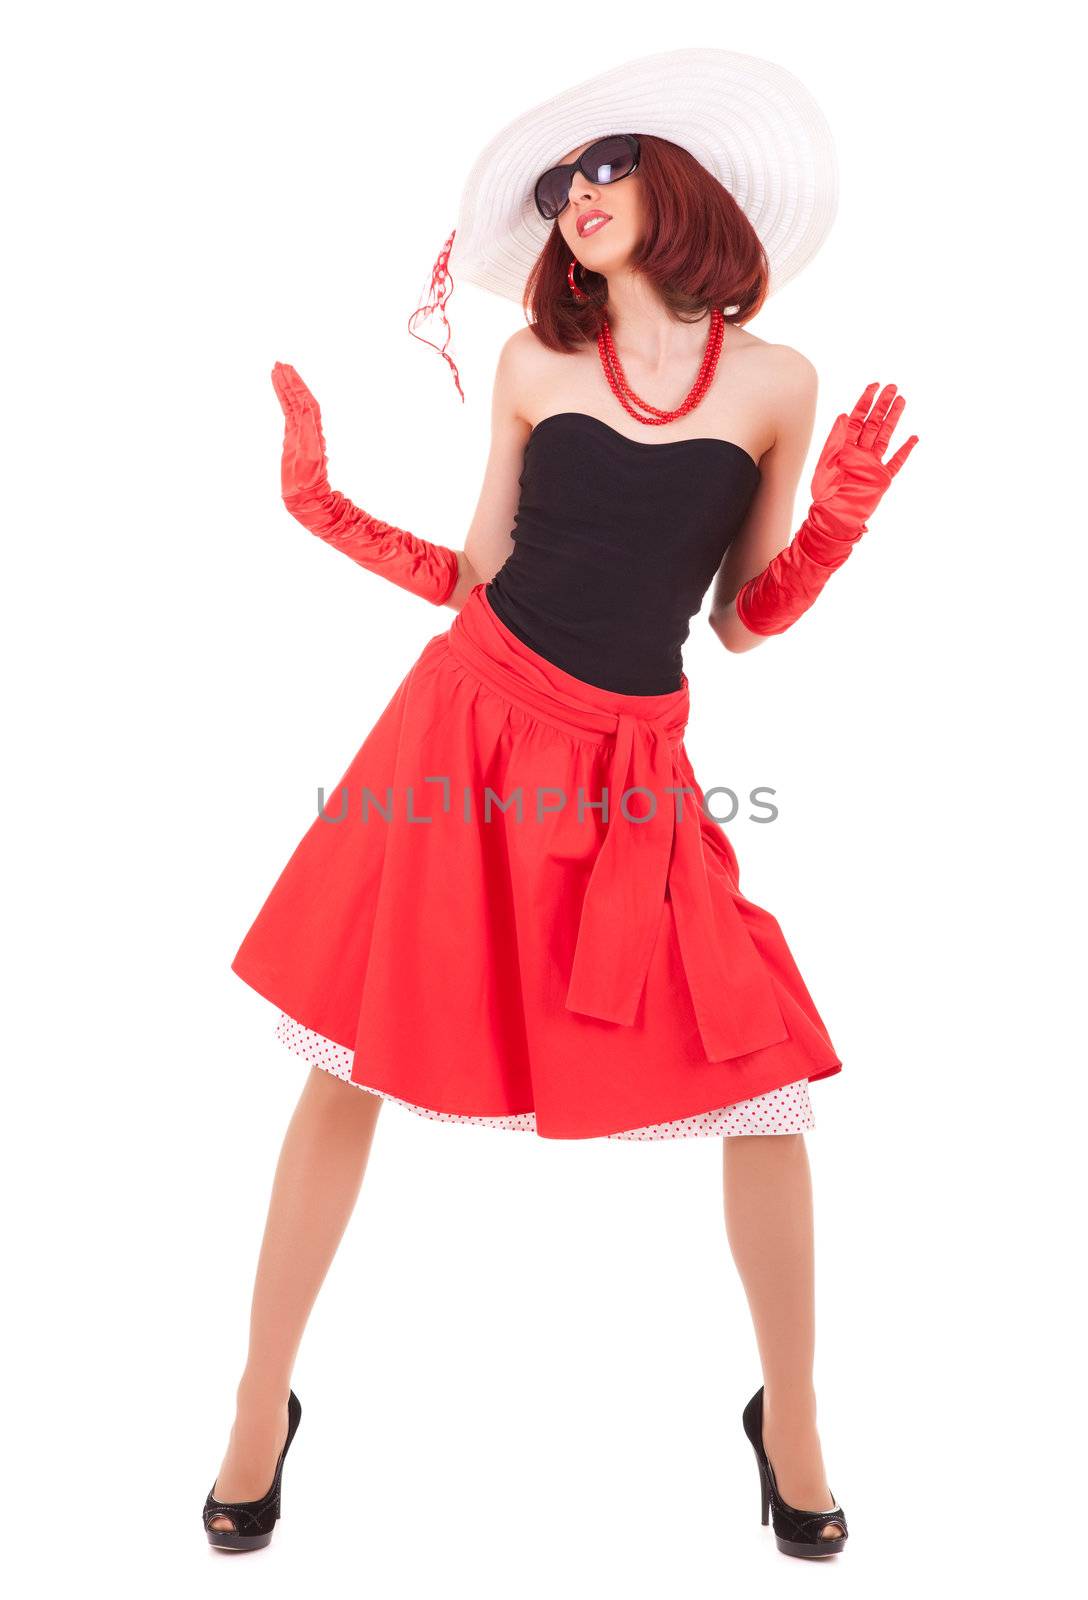 Full-length dancing girl in retro style with big hat on white background